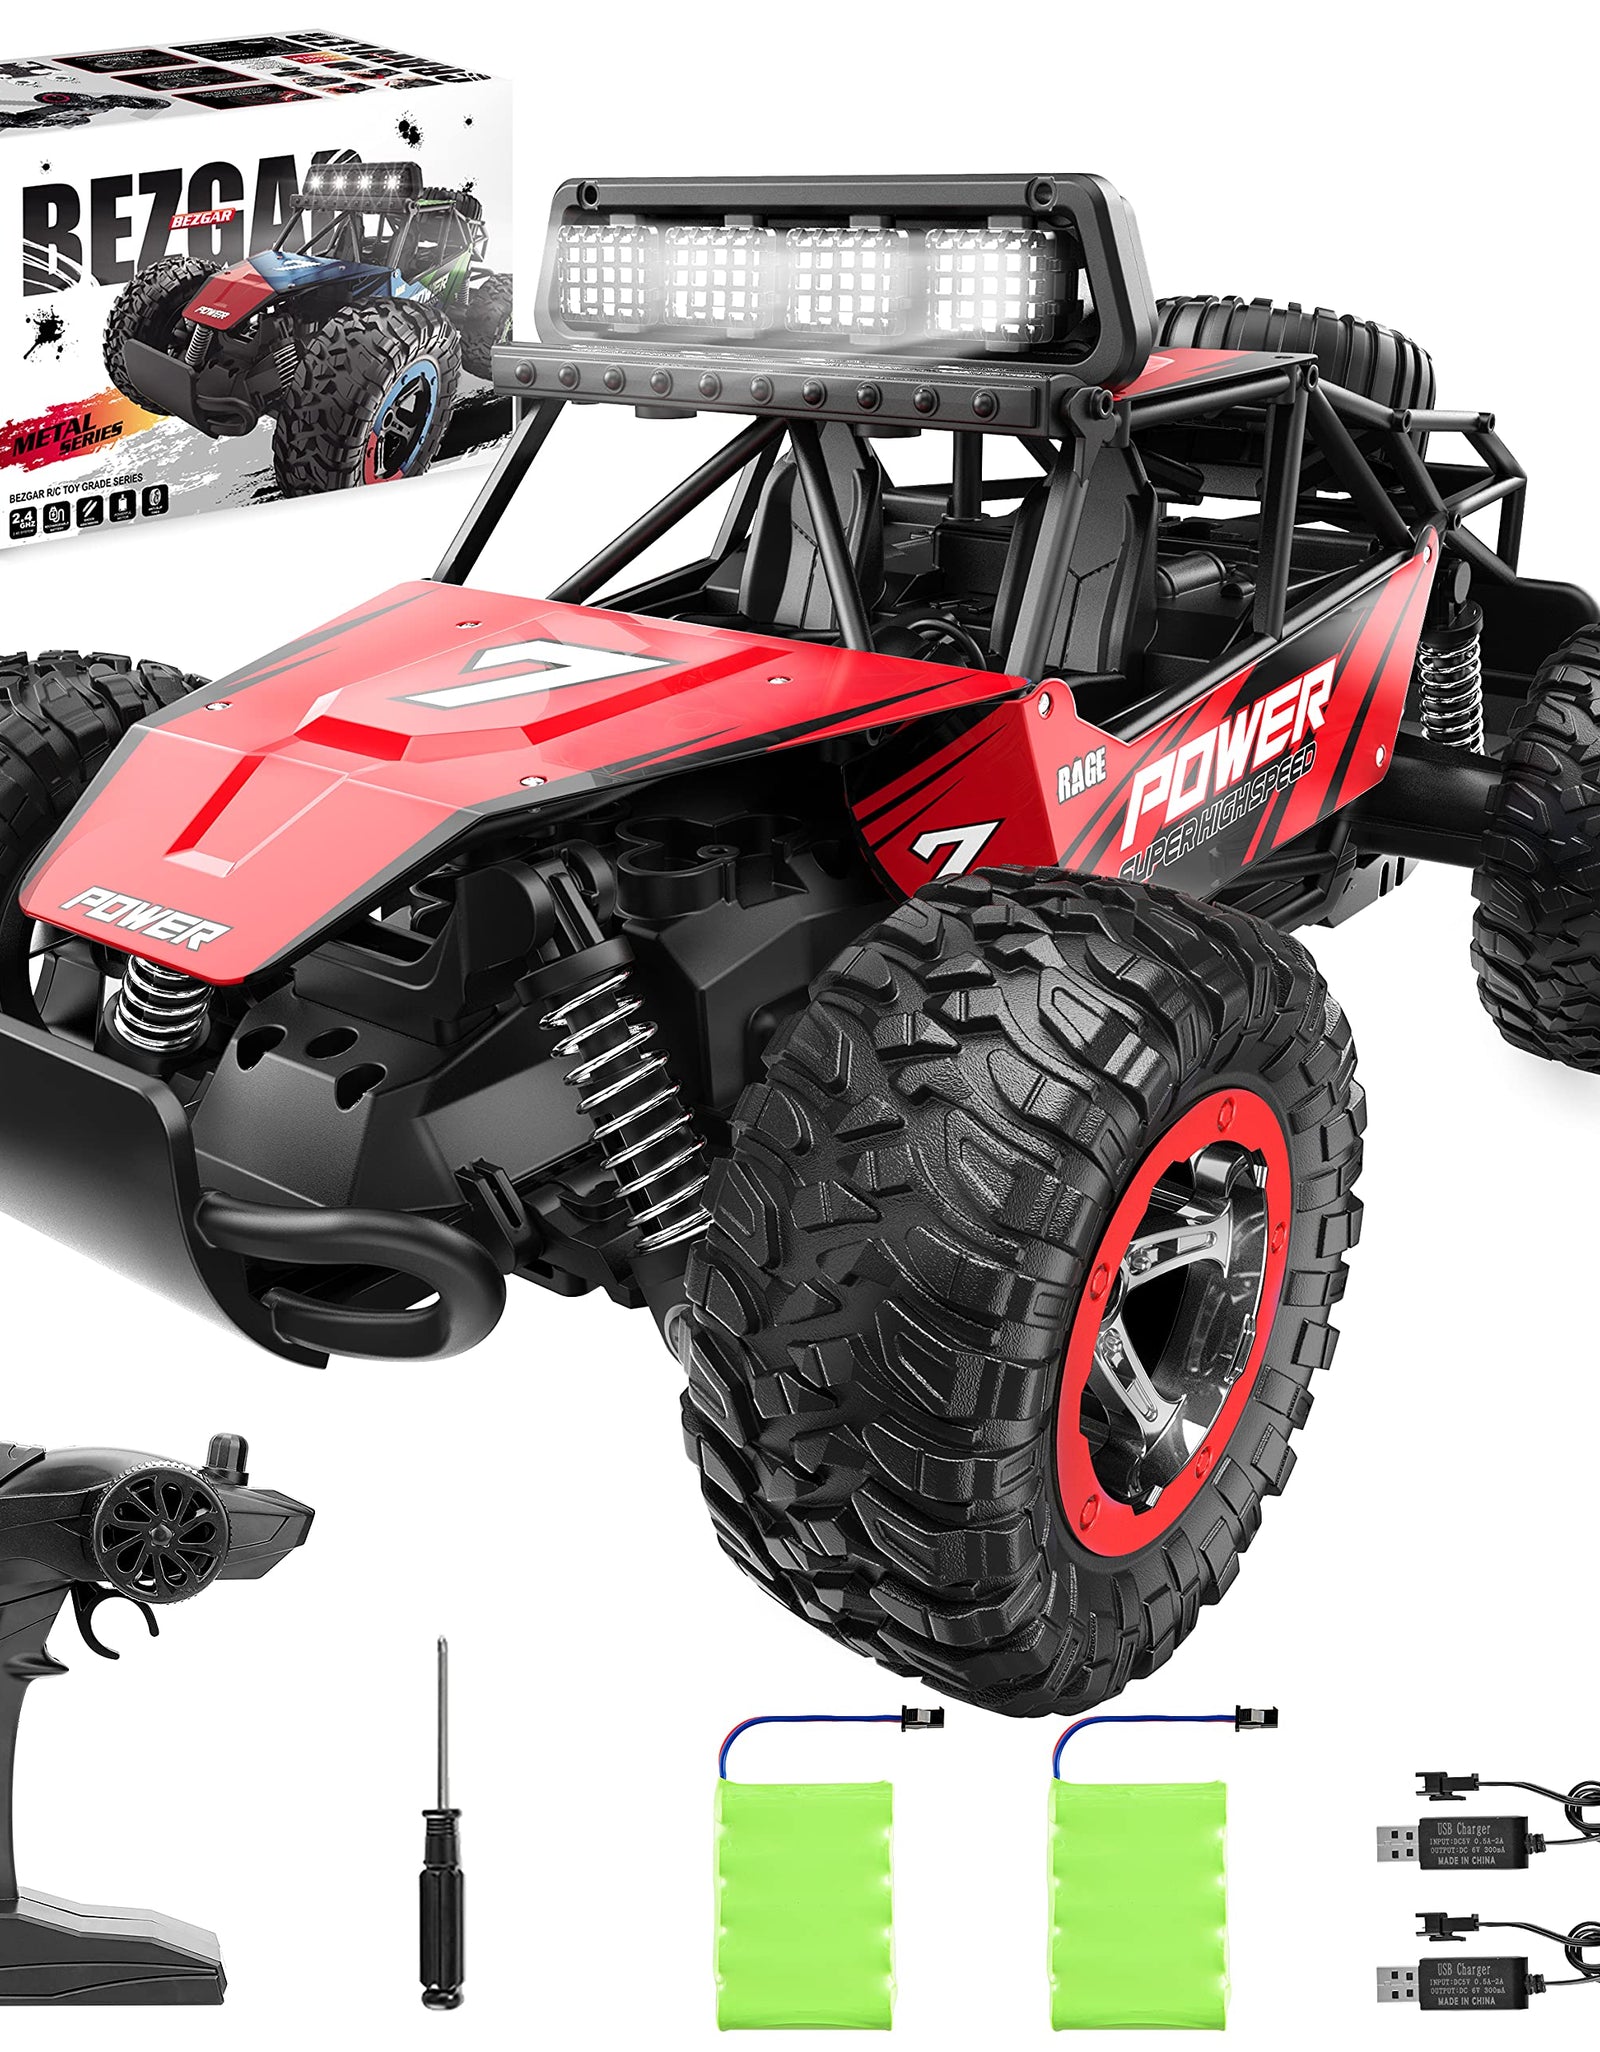 BEZGAR 17 Toy Grade 1:14 Scale Remote Control Car, 2WD High Speed 20 Km/h All Terrains Electric Toy Off Road RC Monster Vehicle Truck Crawler with Two Rechargeable Batteries for Boys Kids and Adults